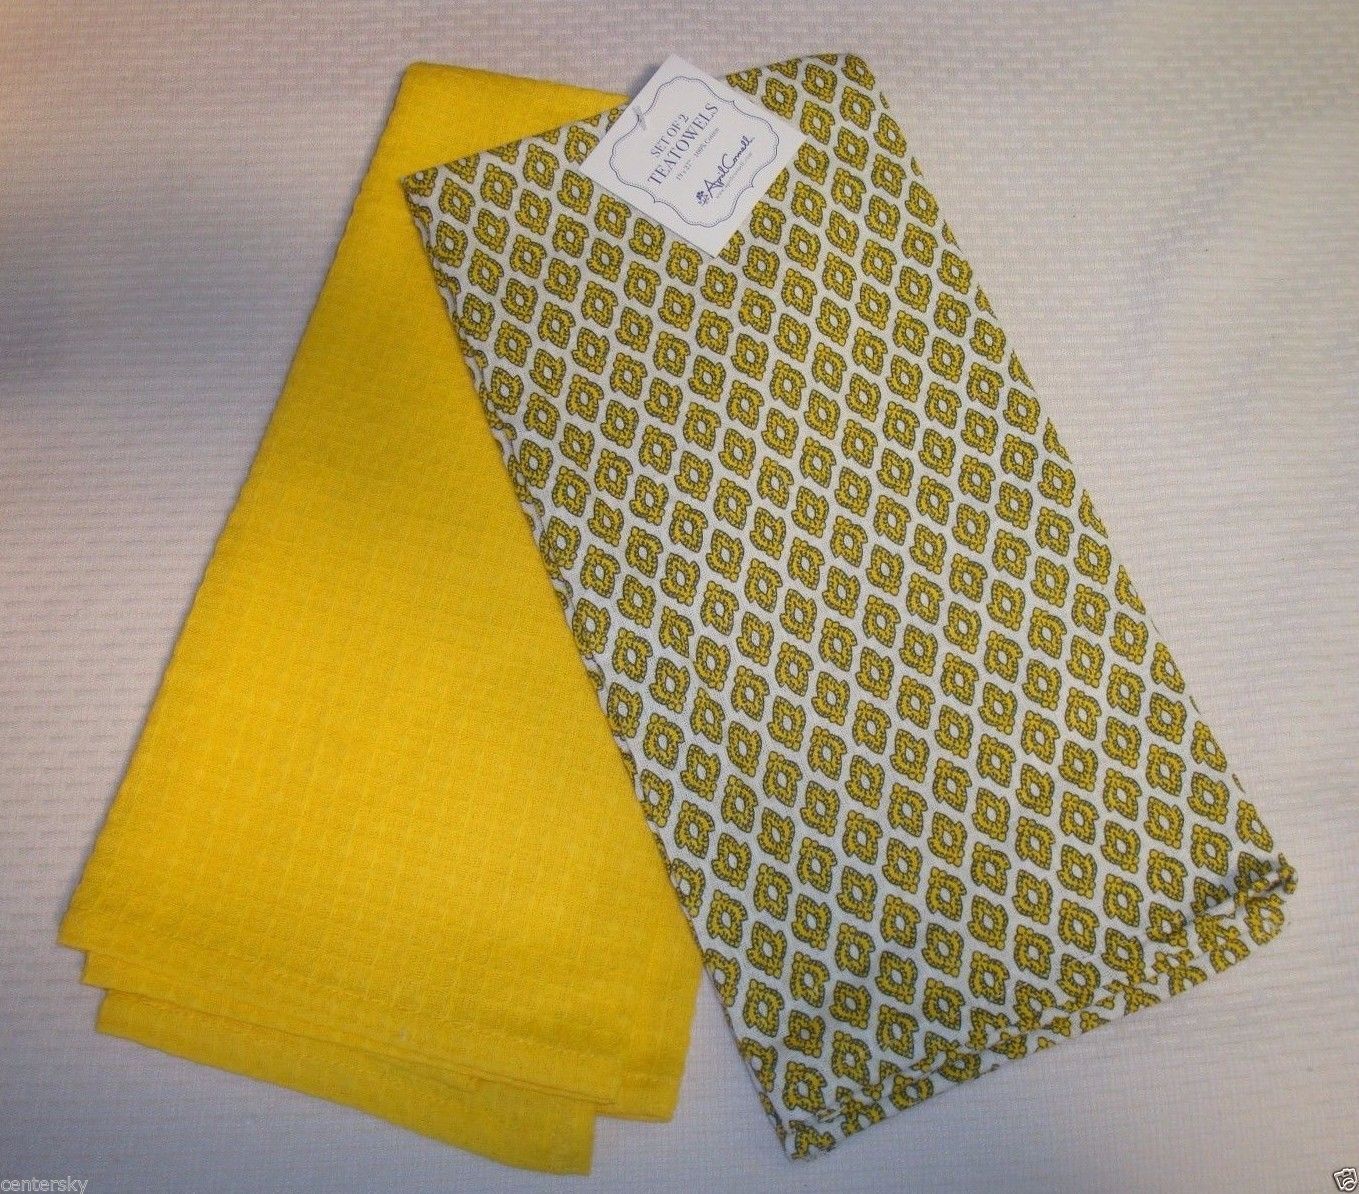 New April Cornell Set of 2 Tea Towels 19 x 27" Yellow Medallion/Yellow Solid - $17.81